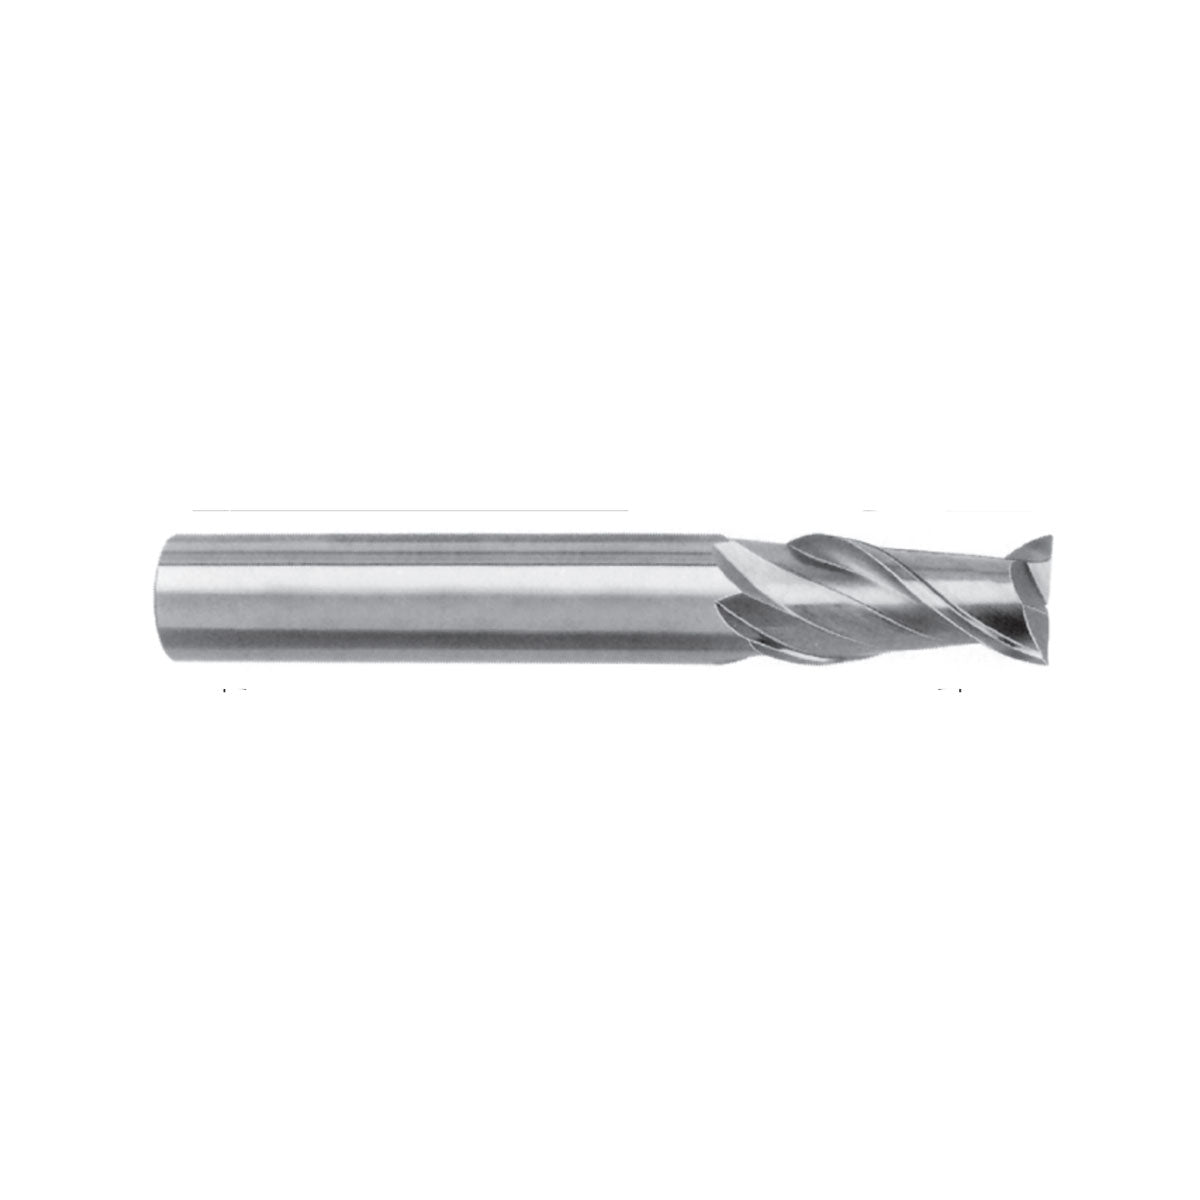 Solid carbide milling End mill General machining of non-ferrous metals 5502R402NM - Makotools Industrial Supply Tools for Metal Cutting